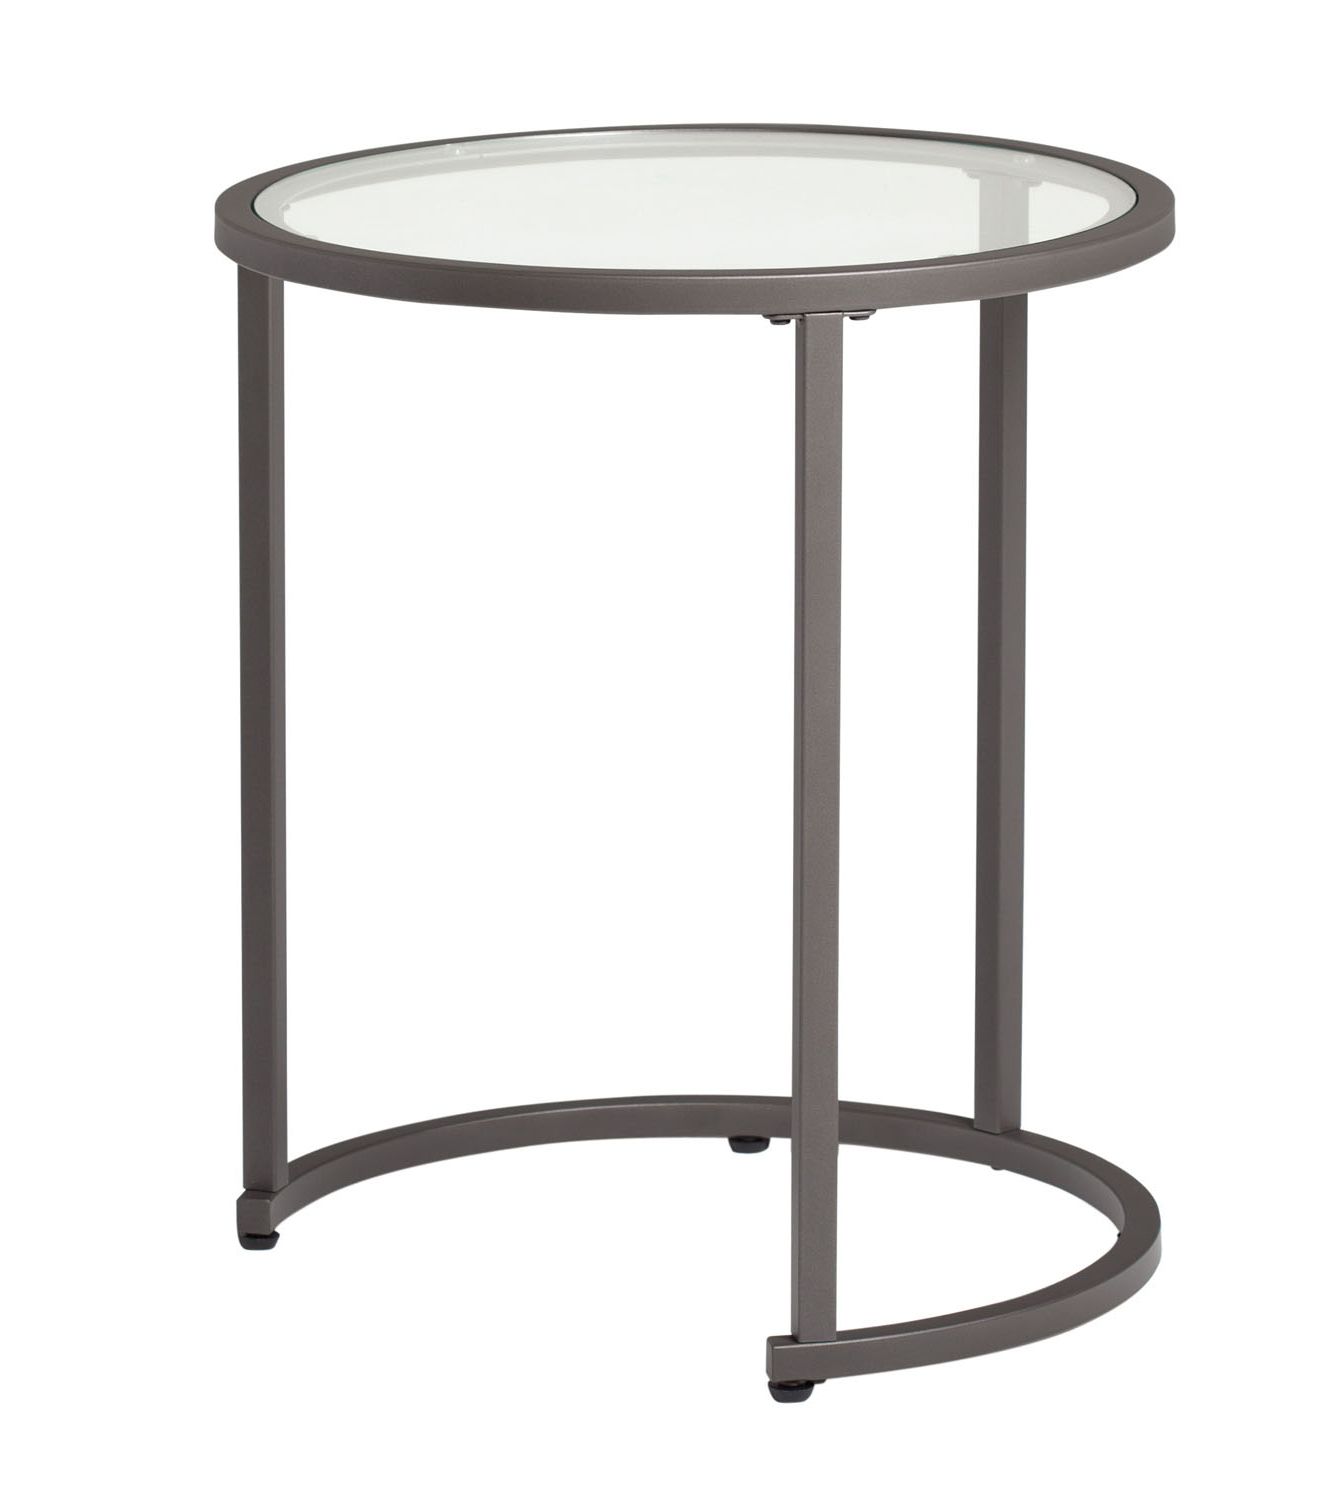 Offex Modern Glass Round Nesting Tables In Pewter 20 Inches – Walmart In Famous Glass And Pewter Rectangular Desks (View 4 of 15)